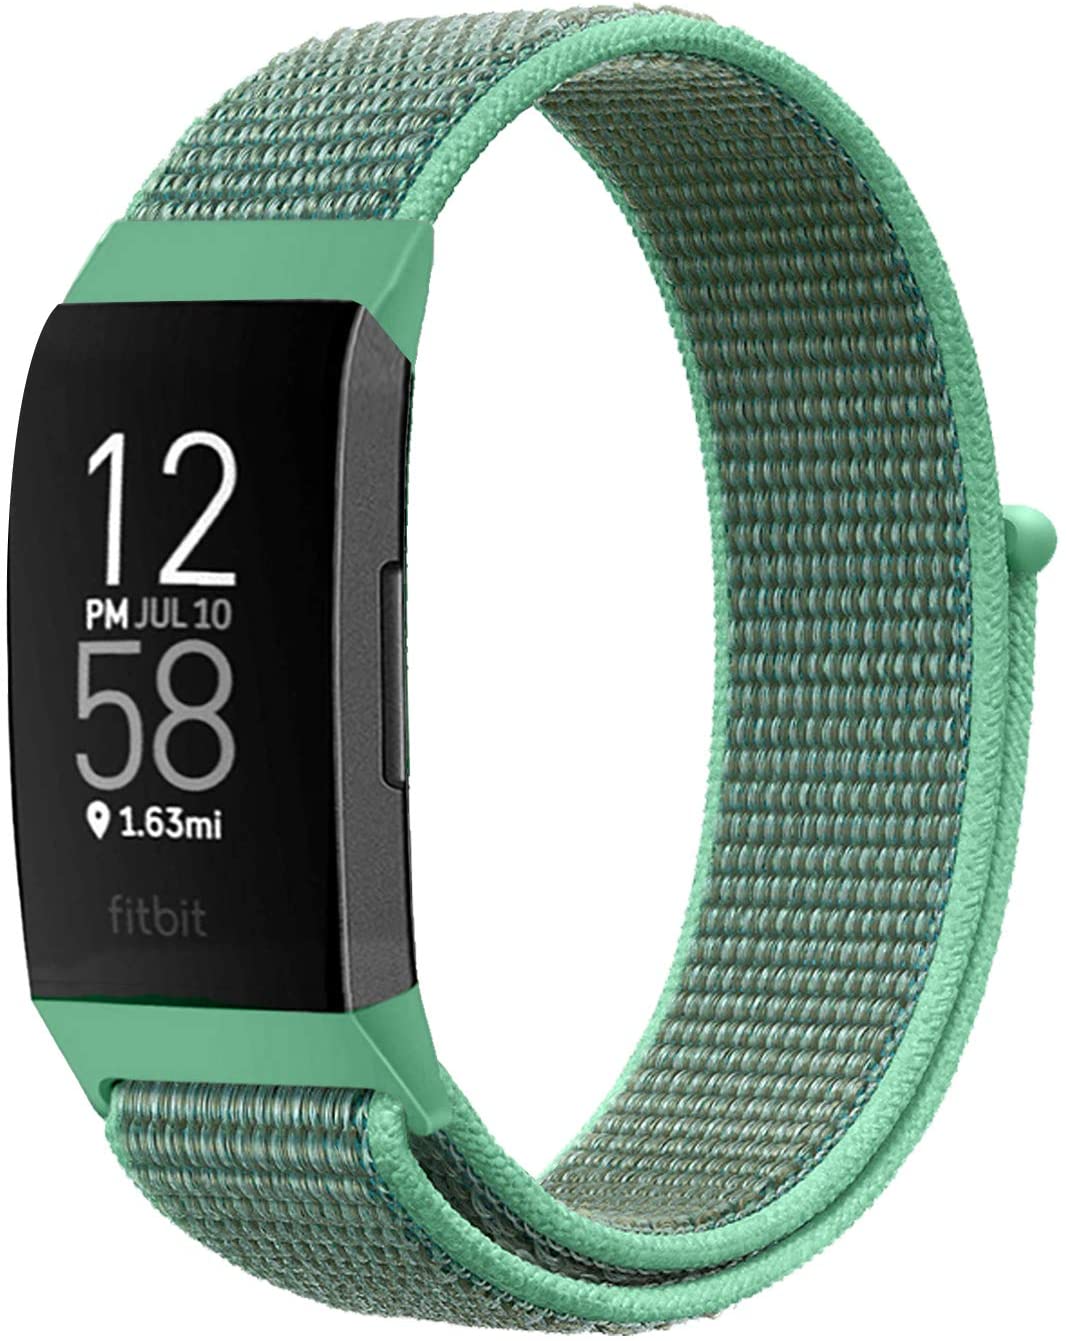 Youkex Fitbit Charge 4 Band